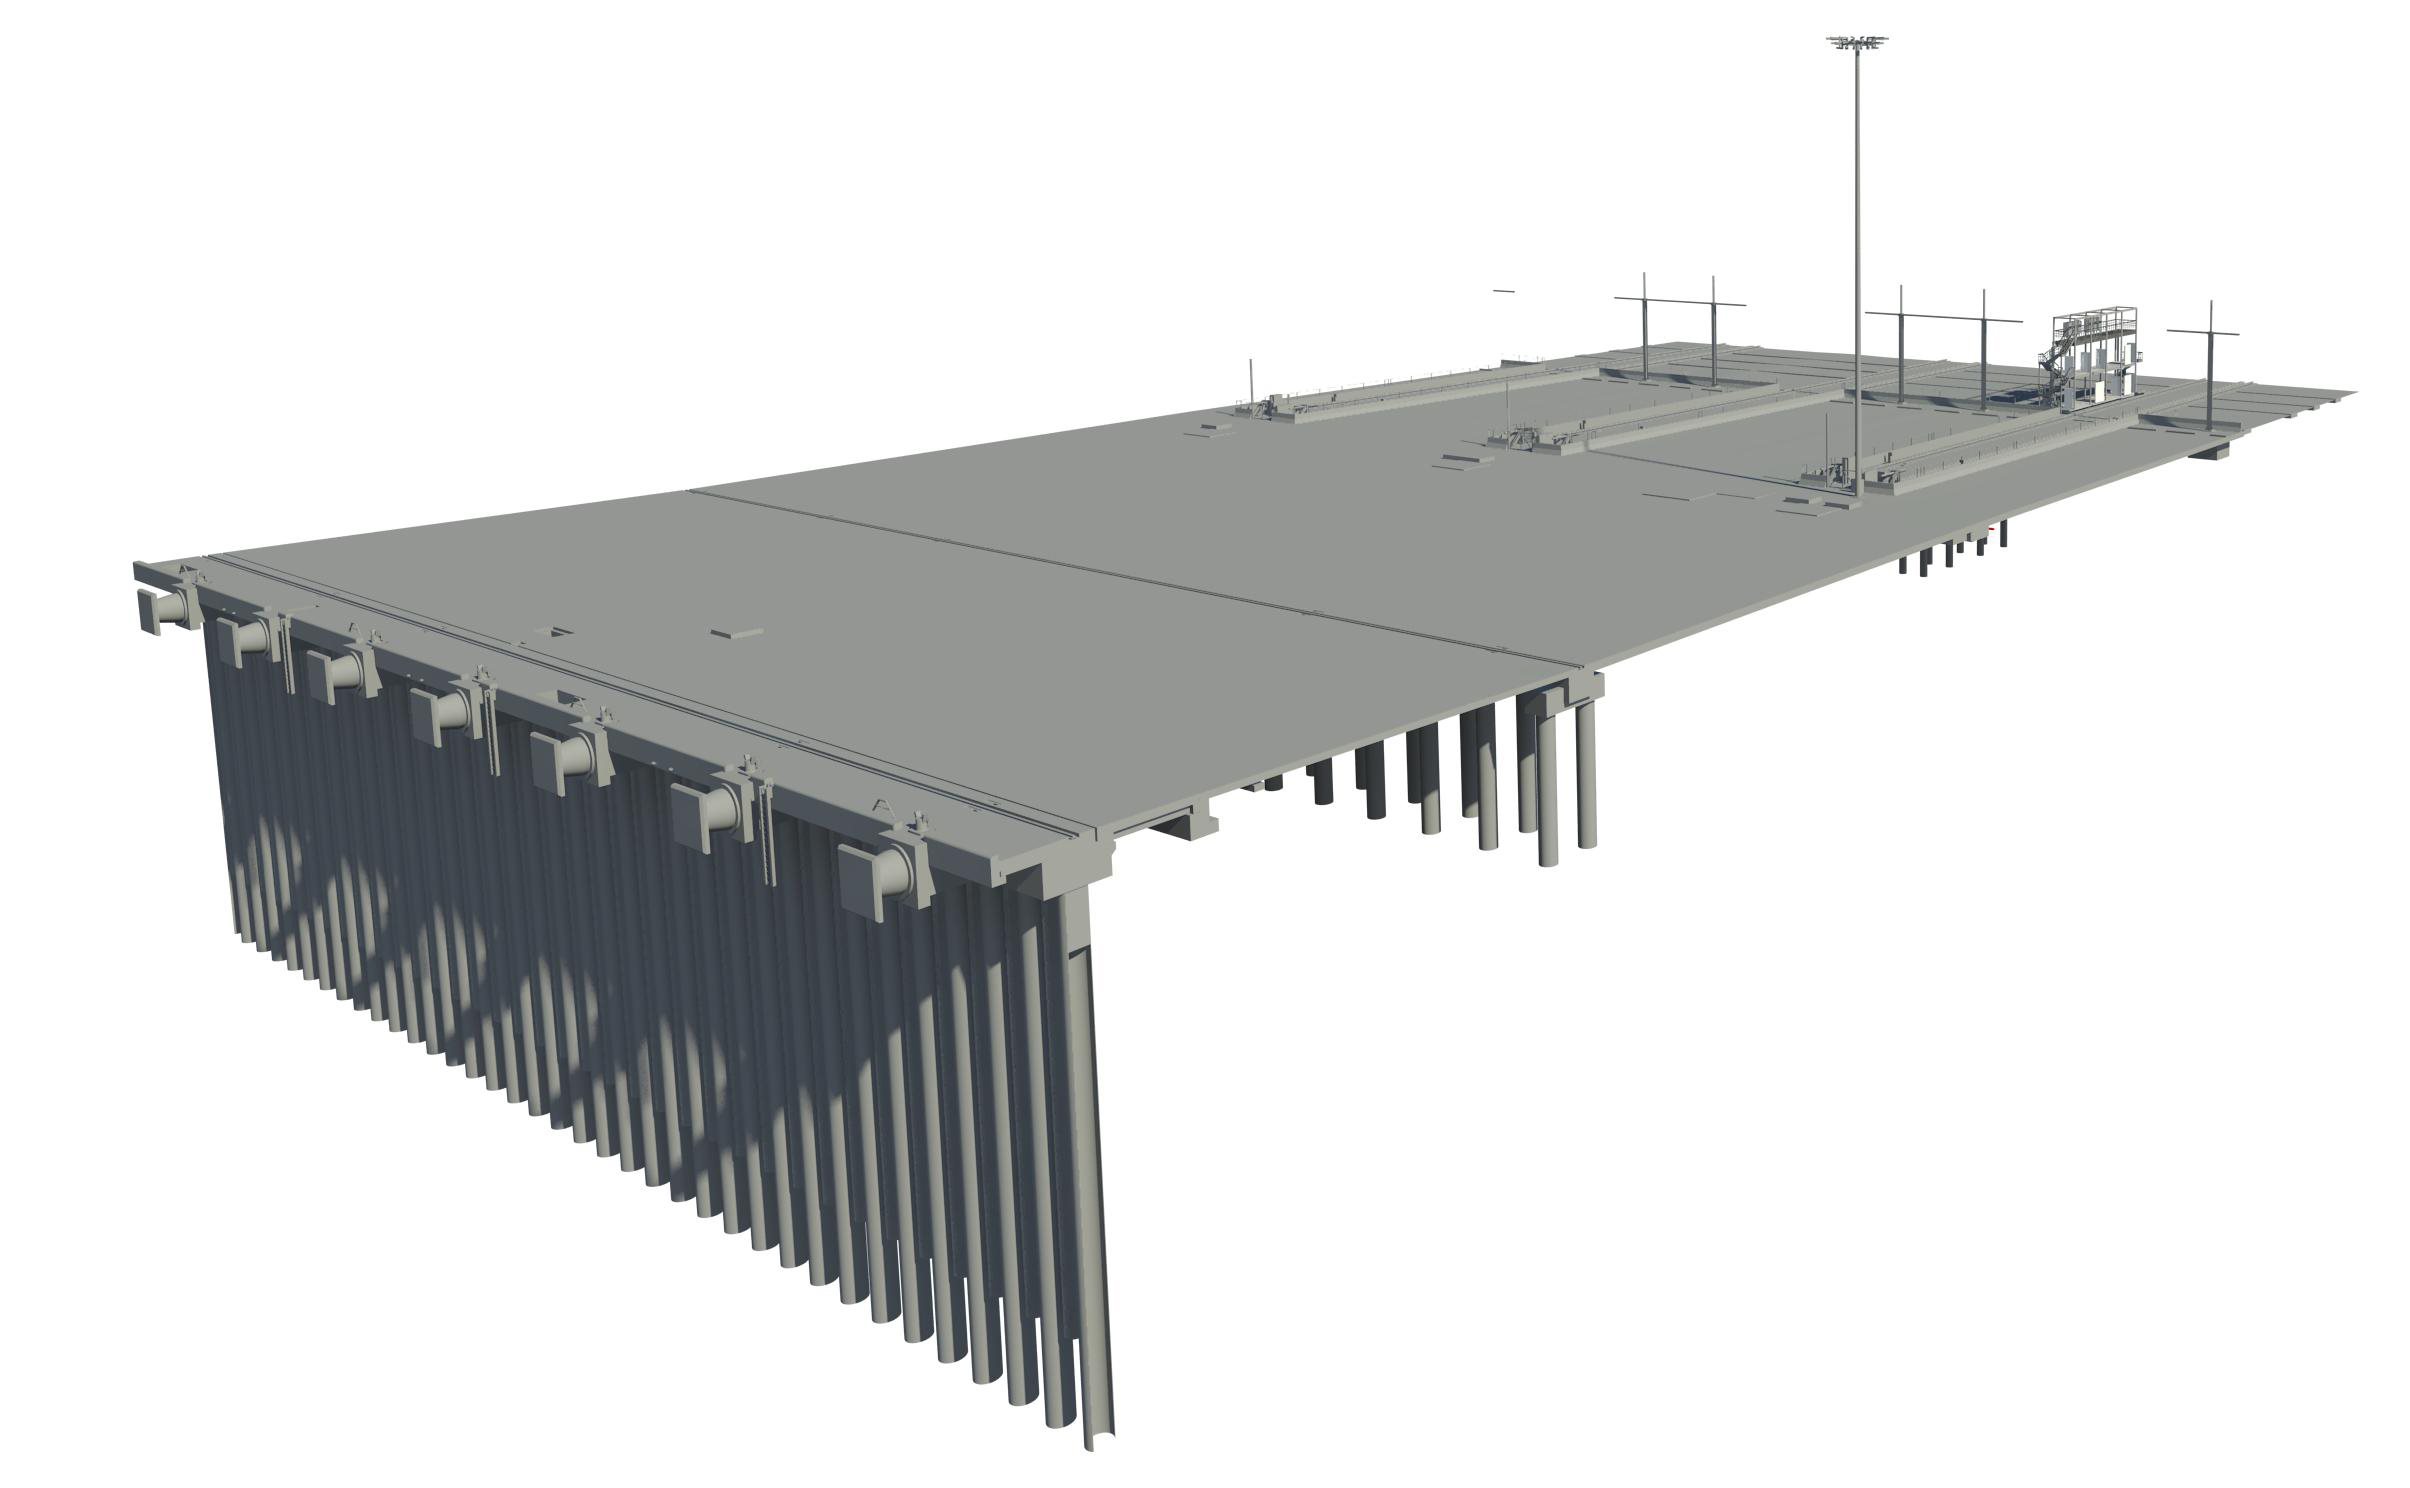 Building information modelling (BIM) 3D view of the Caribbean Container Port in The Bahamas